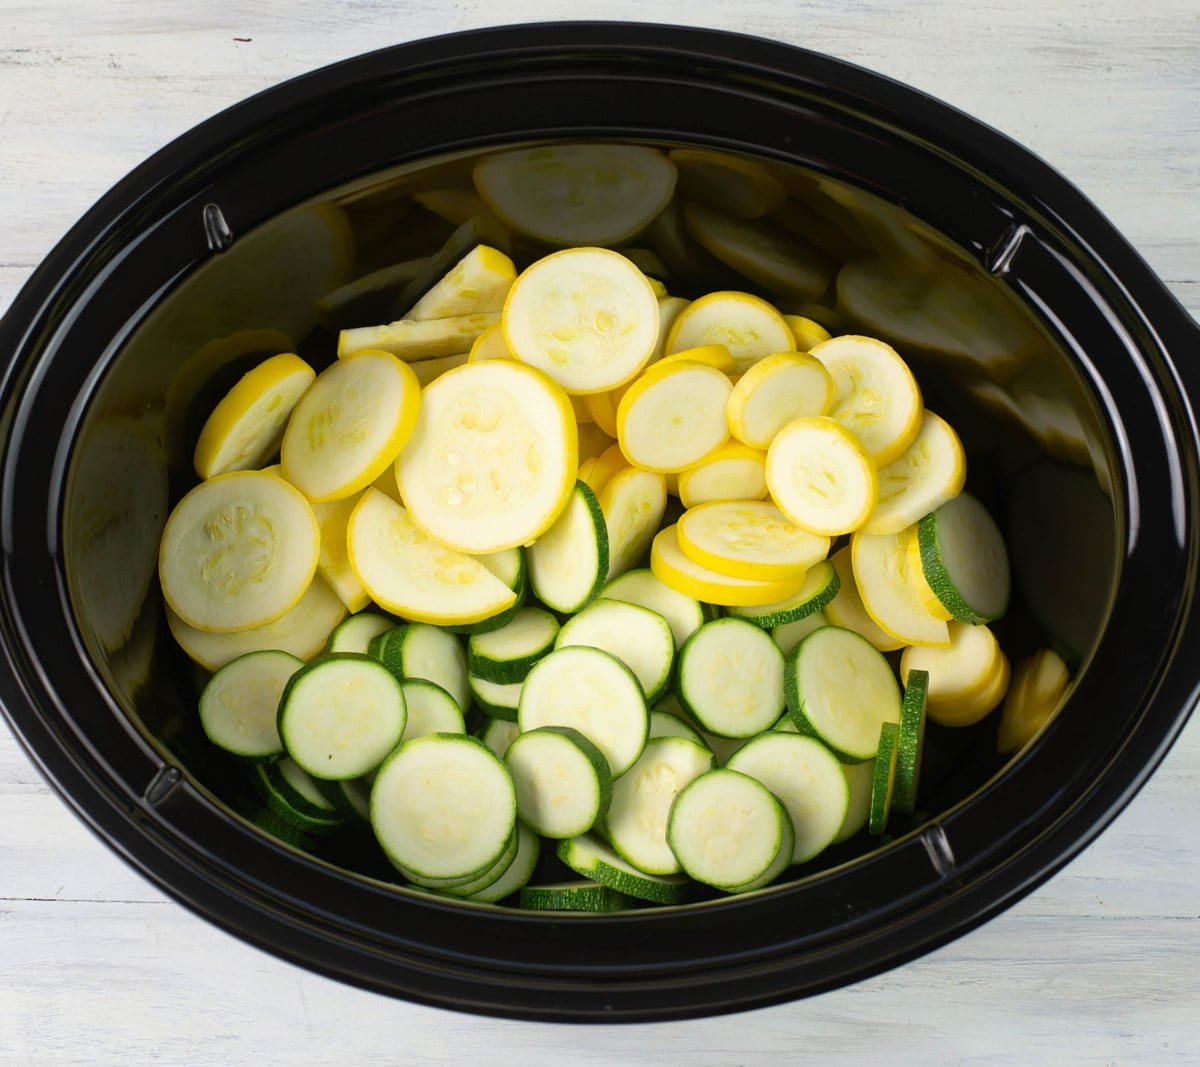 Sliced yellow squash and green zucchini in the crock pot. 